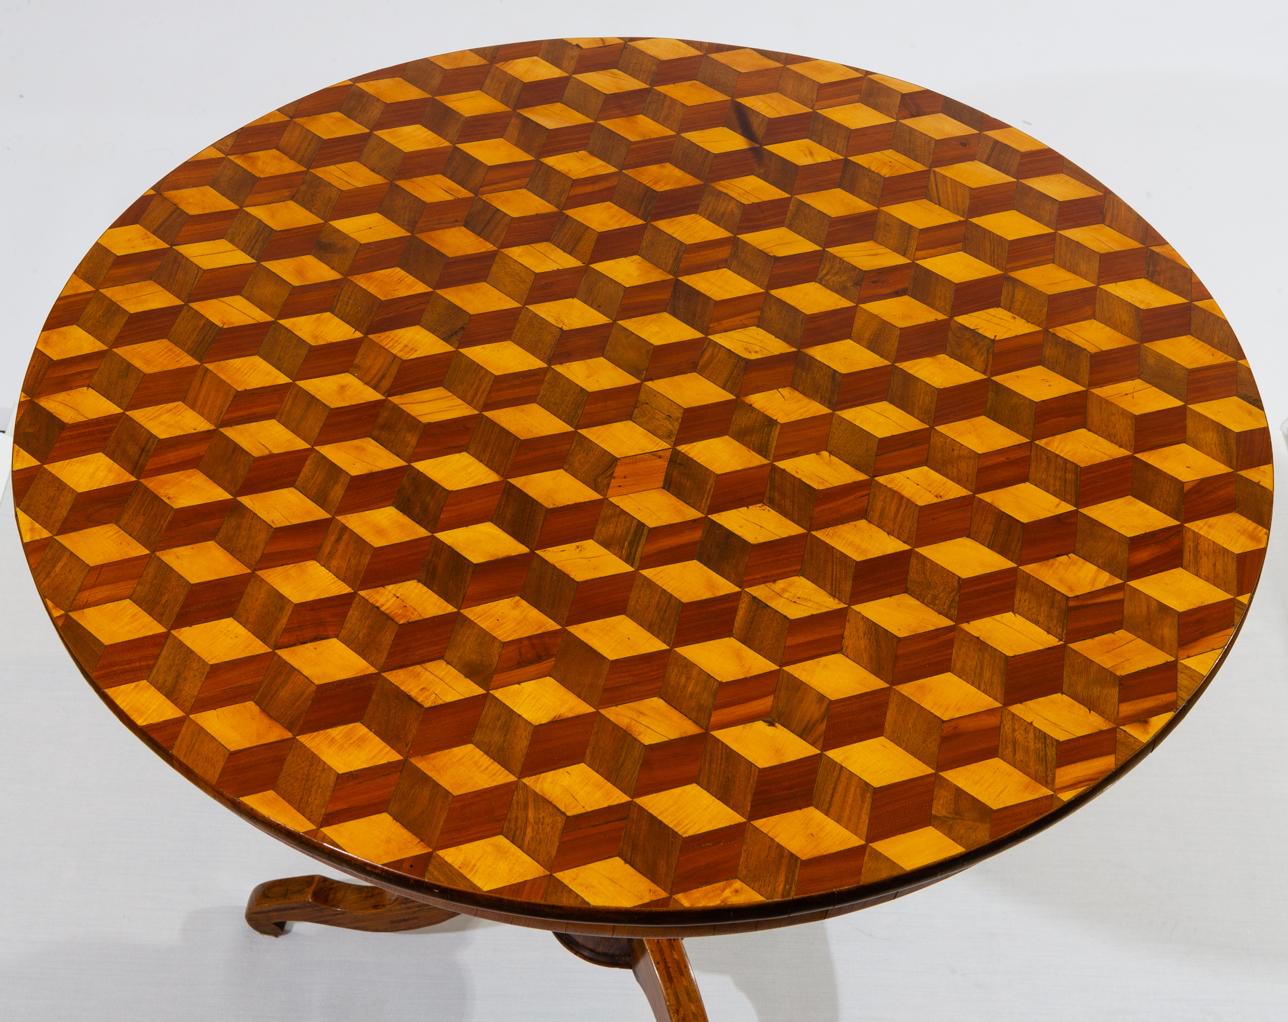 Italian antique inlaid  coffee table: the top of elegance; famous,  named from Rolo, a little village in Italy, in Emilia Romagna.  Rolo's inlaid furniture is famous all over the world, especially the coffee tables , which have beautiful inlays.
The